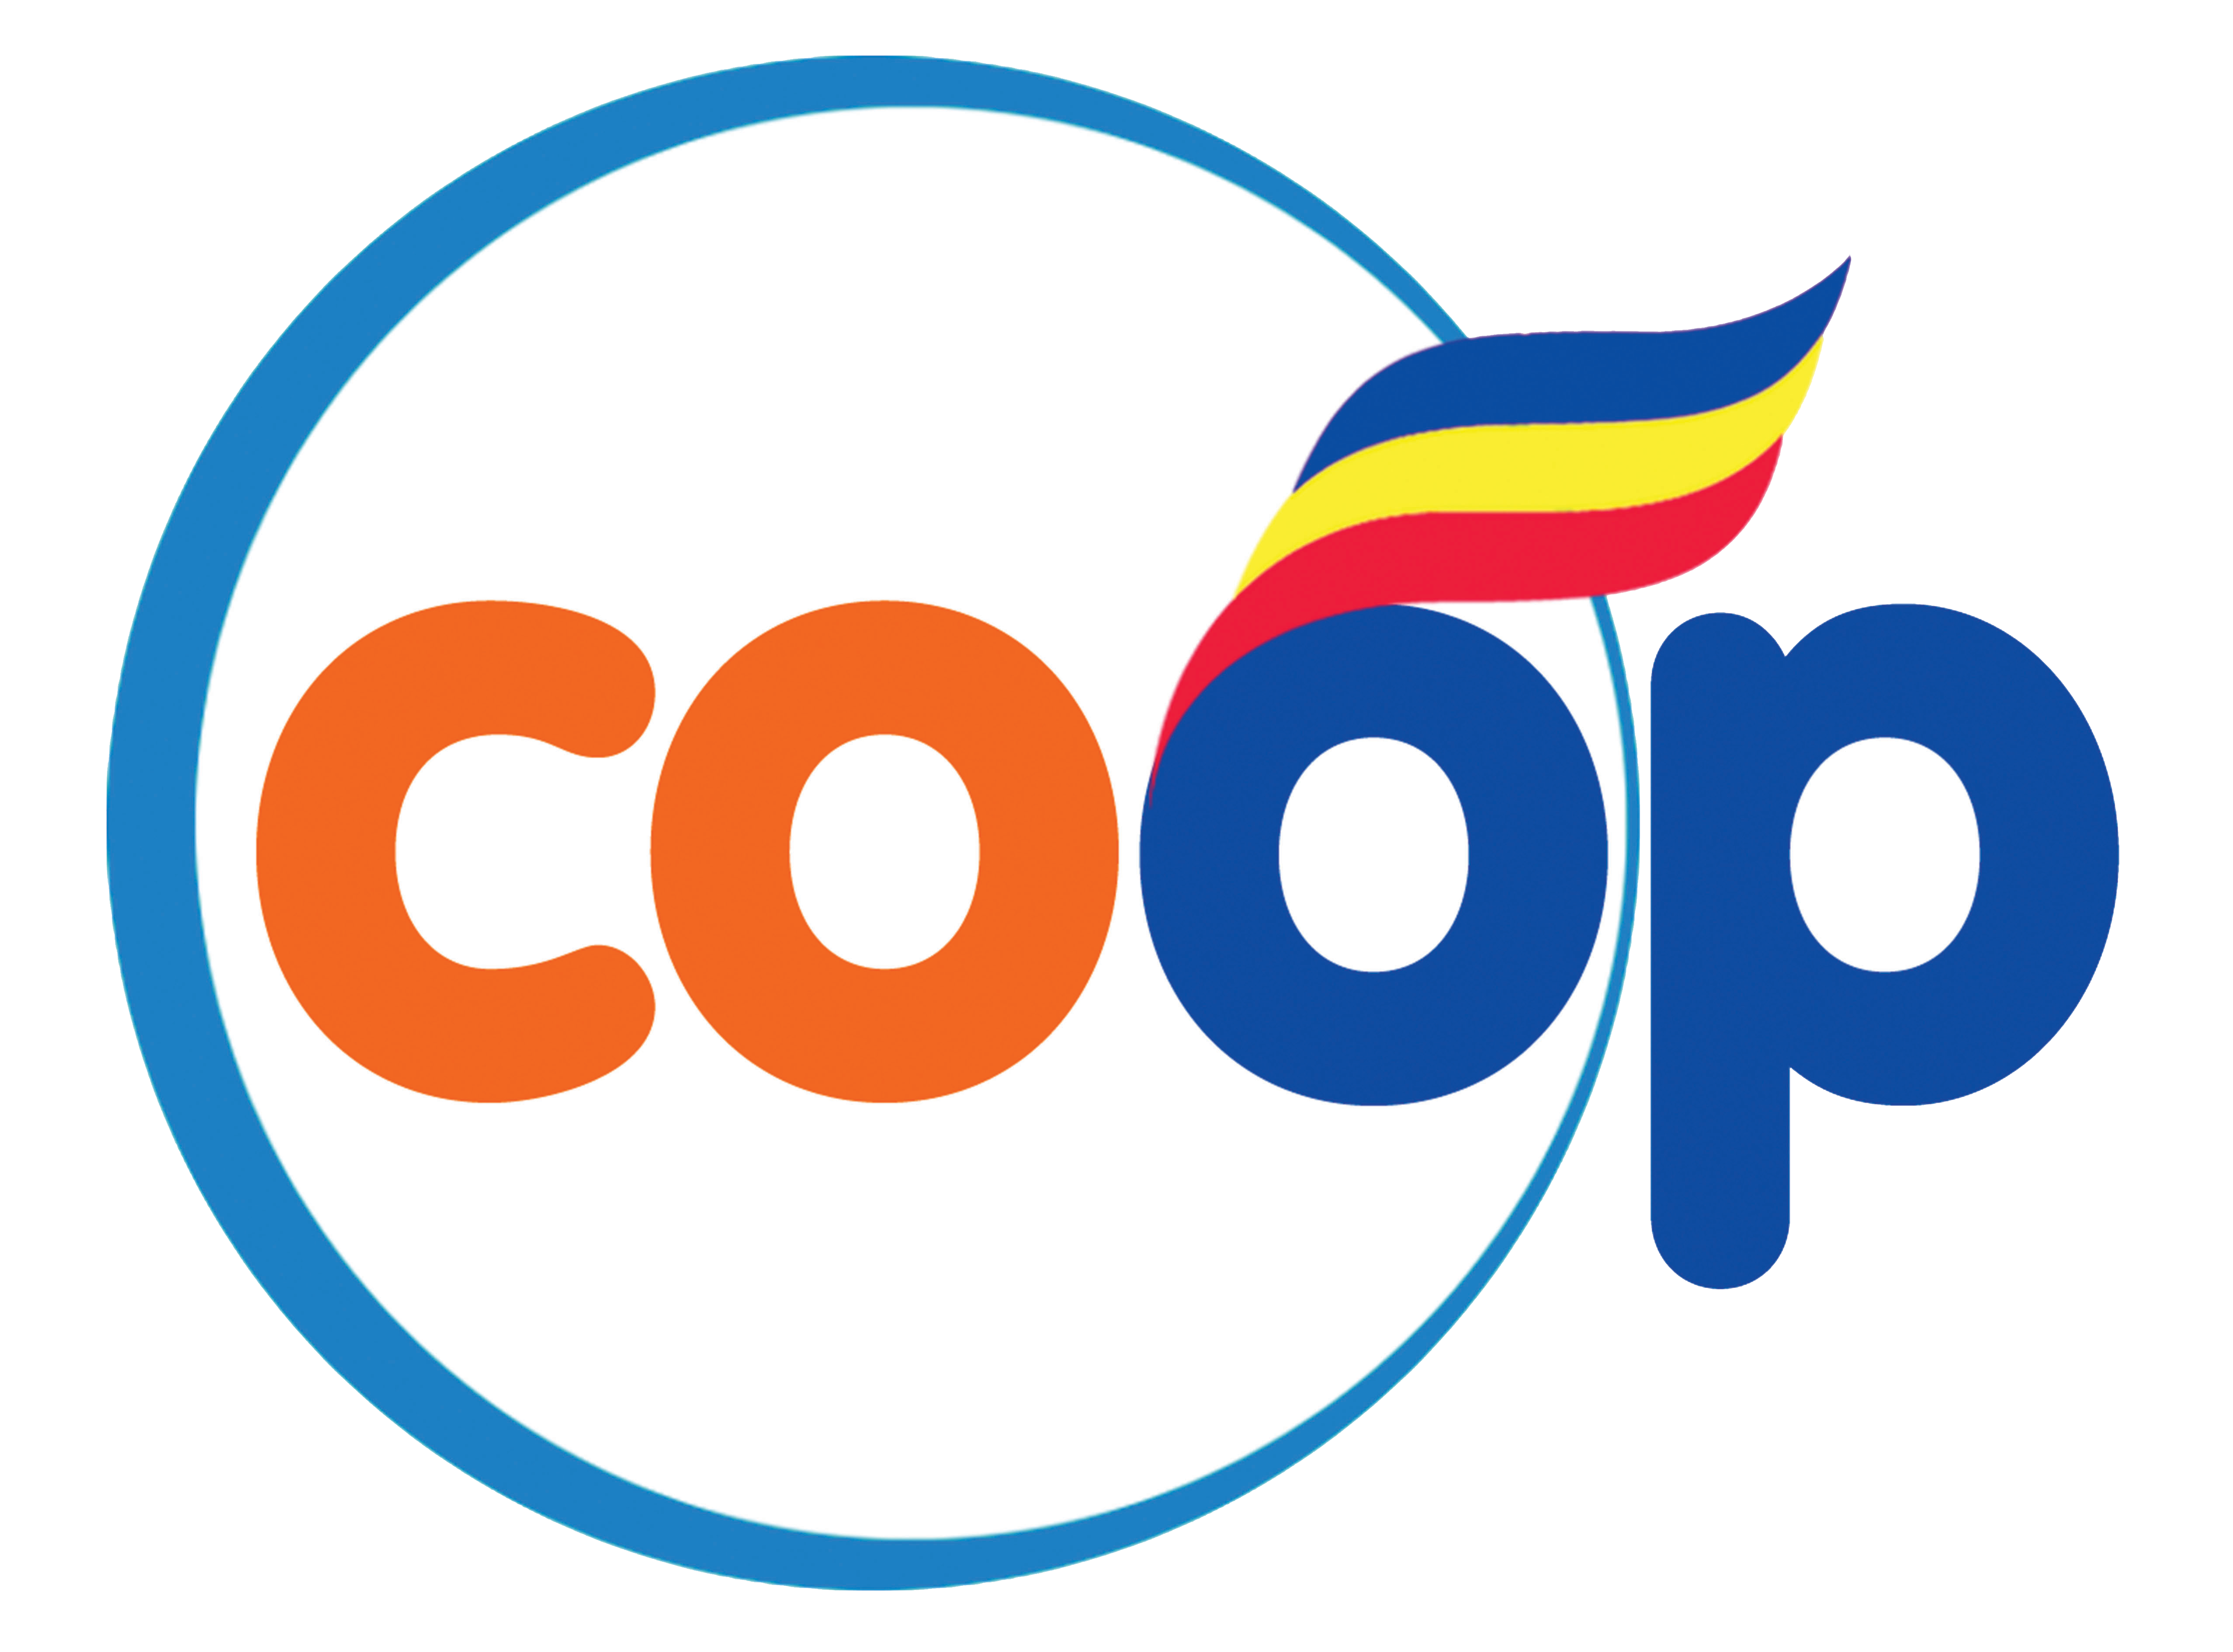 National Confederation of Cooperatives